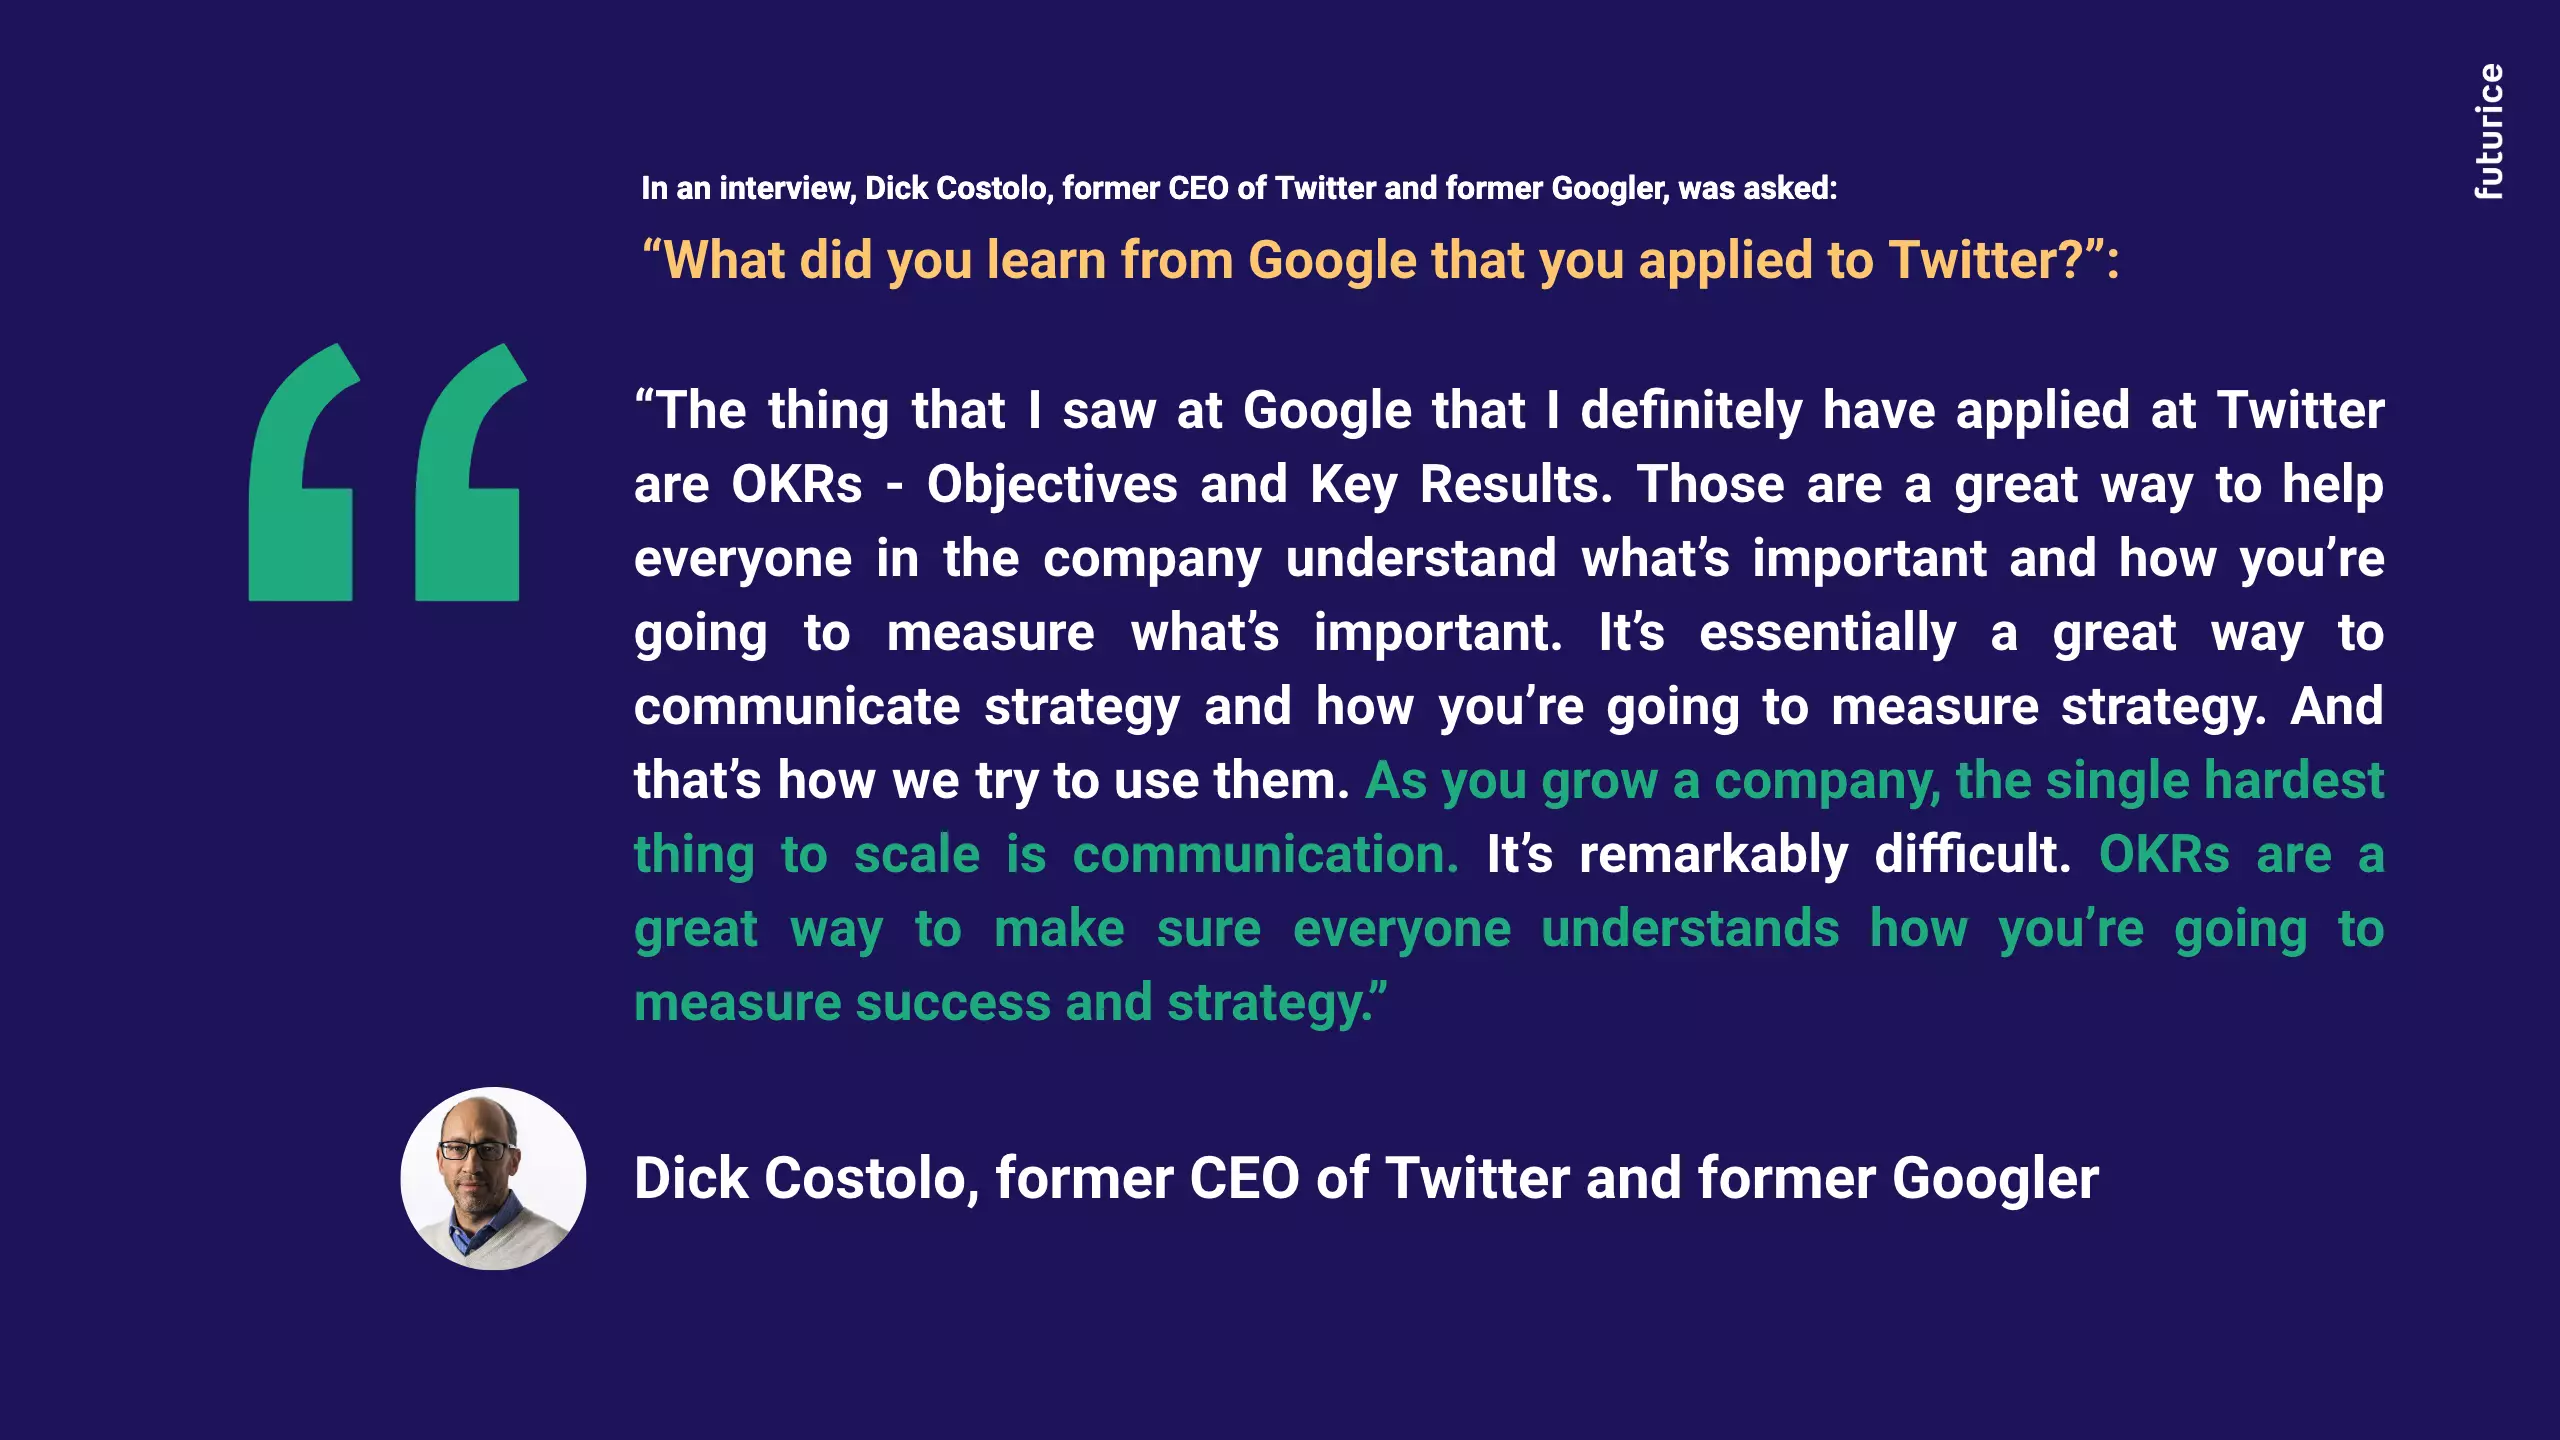 Quote from Dick Costolo (former CEO of Twitter and former Googler)